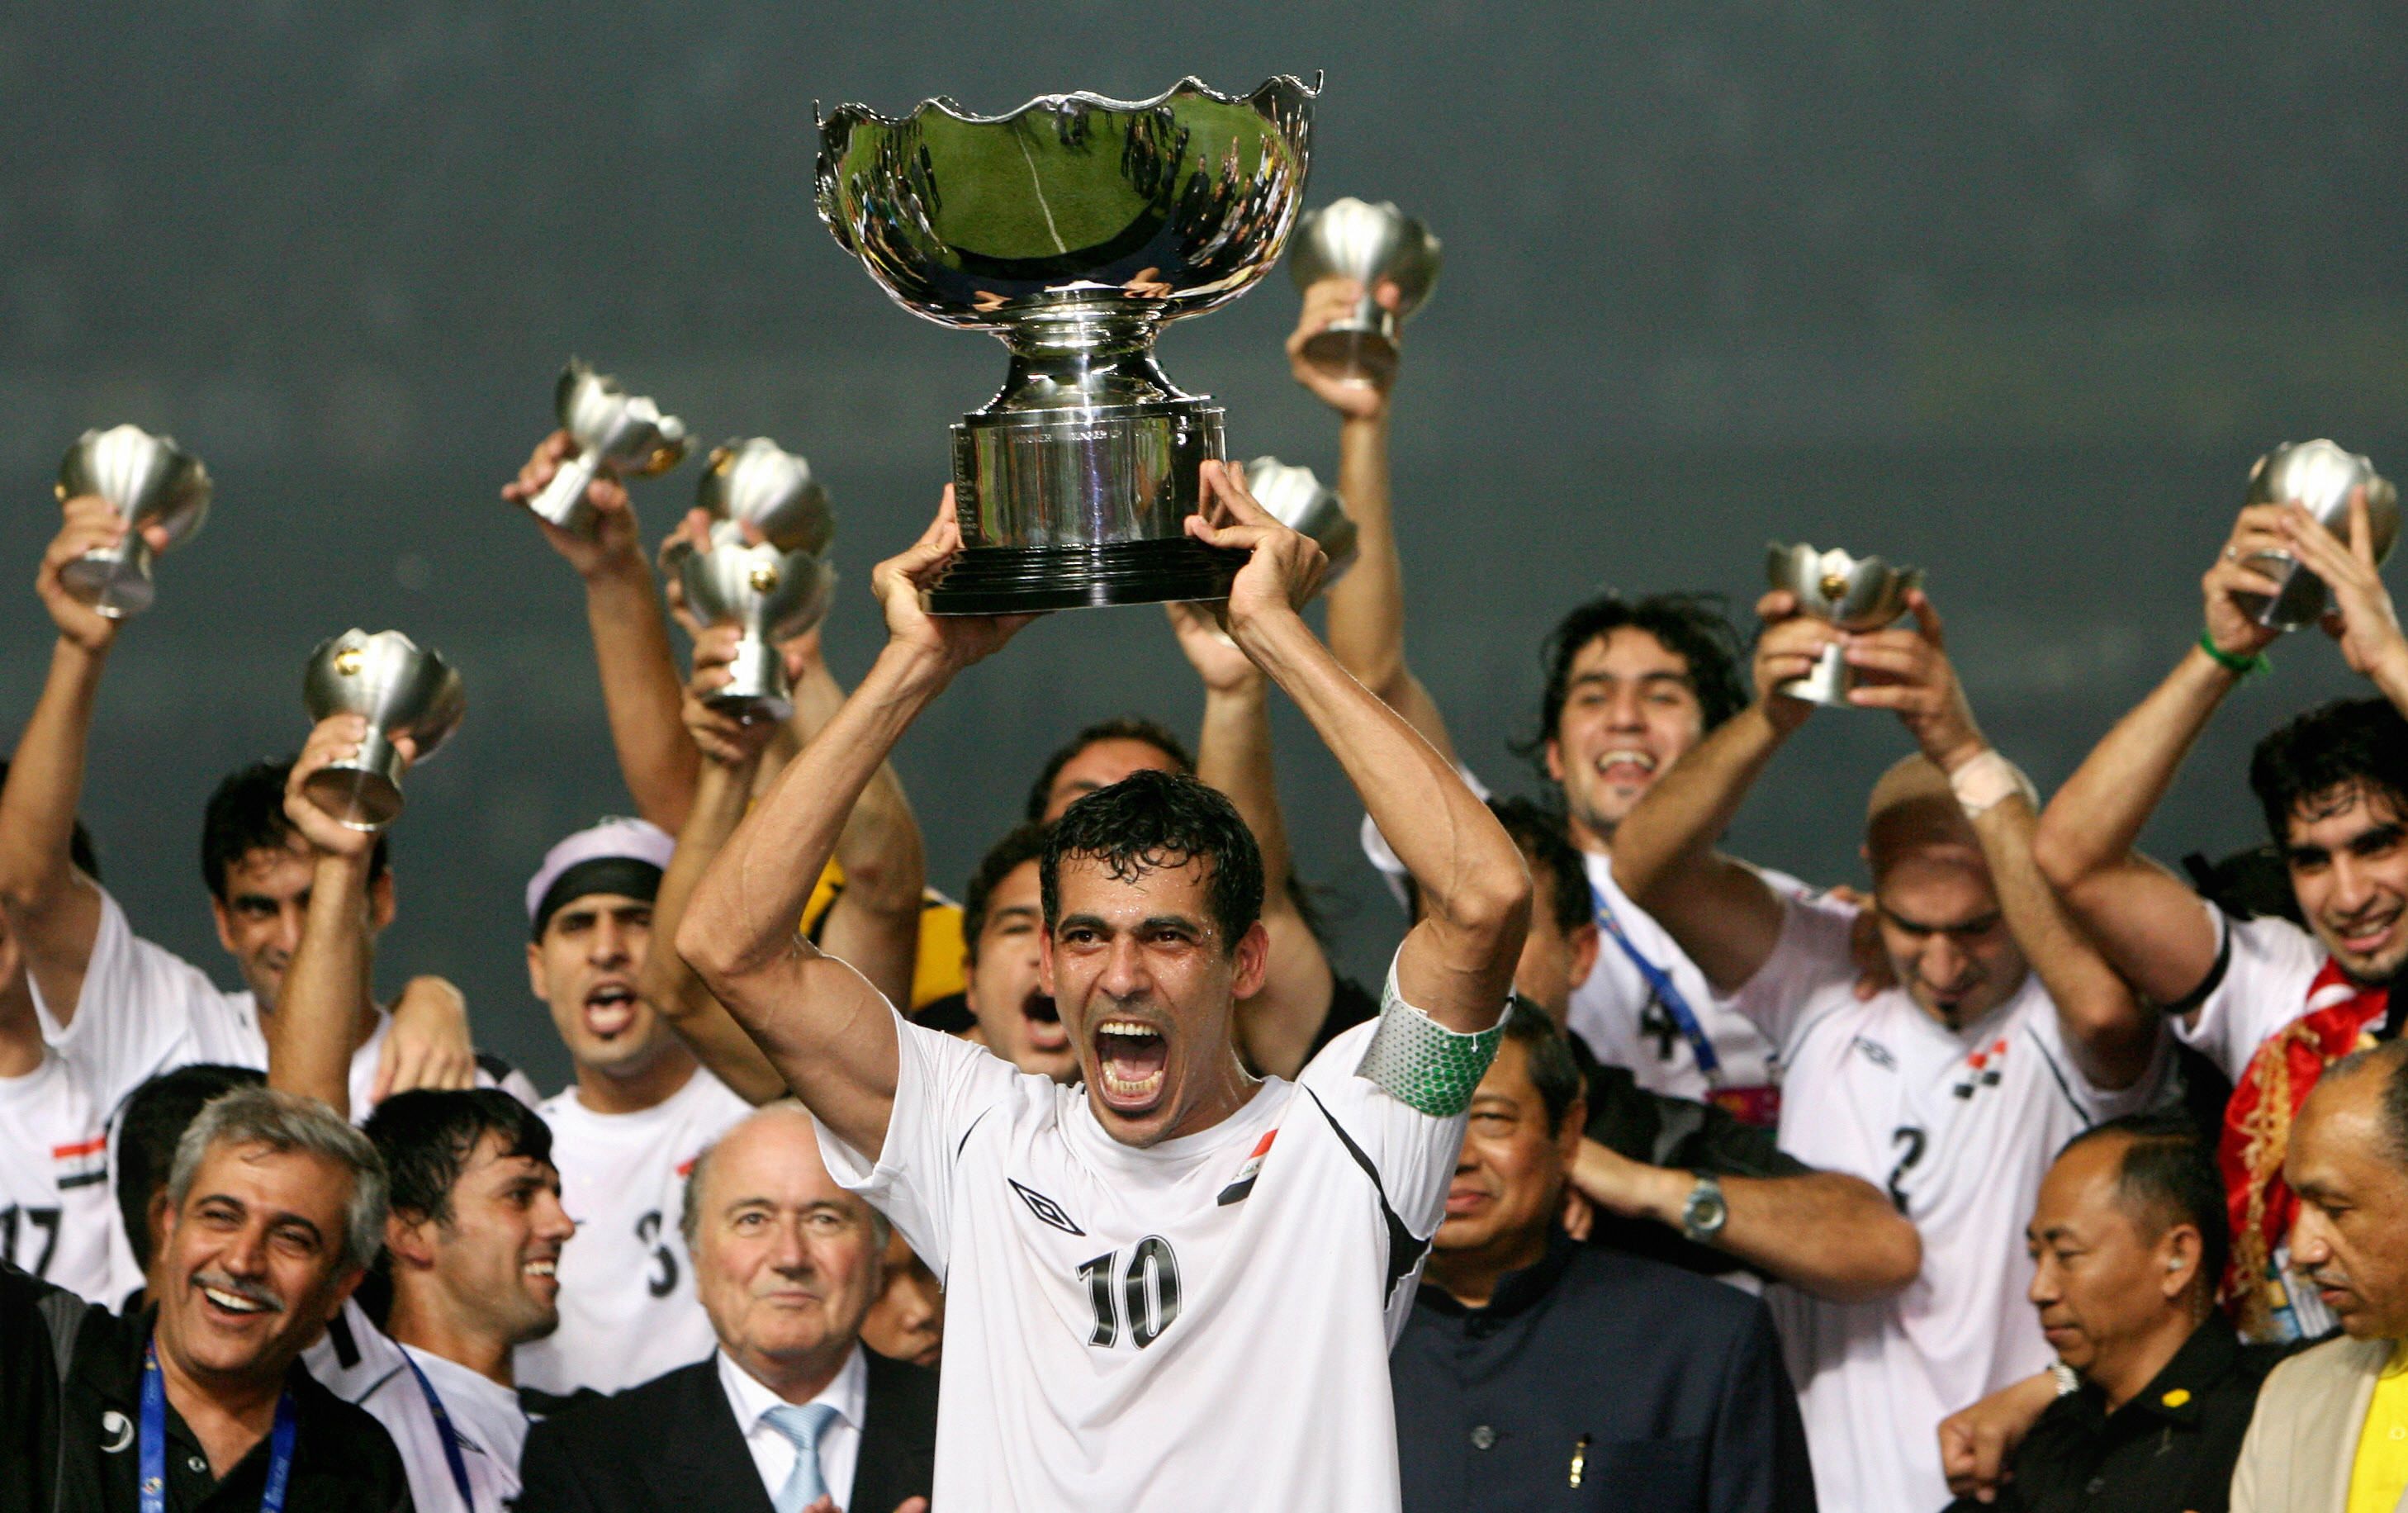 Ten years on: How Iraq's soccer stars brought warring nation together